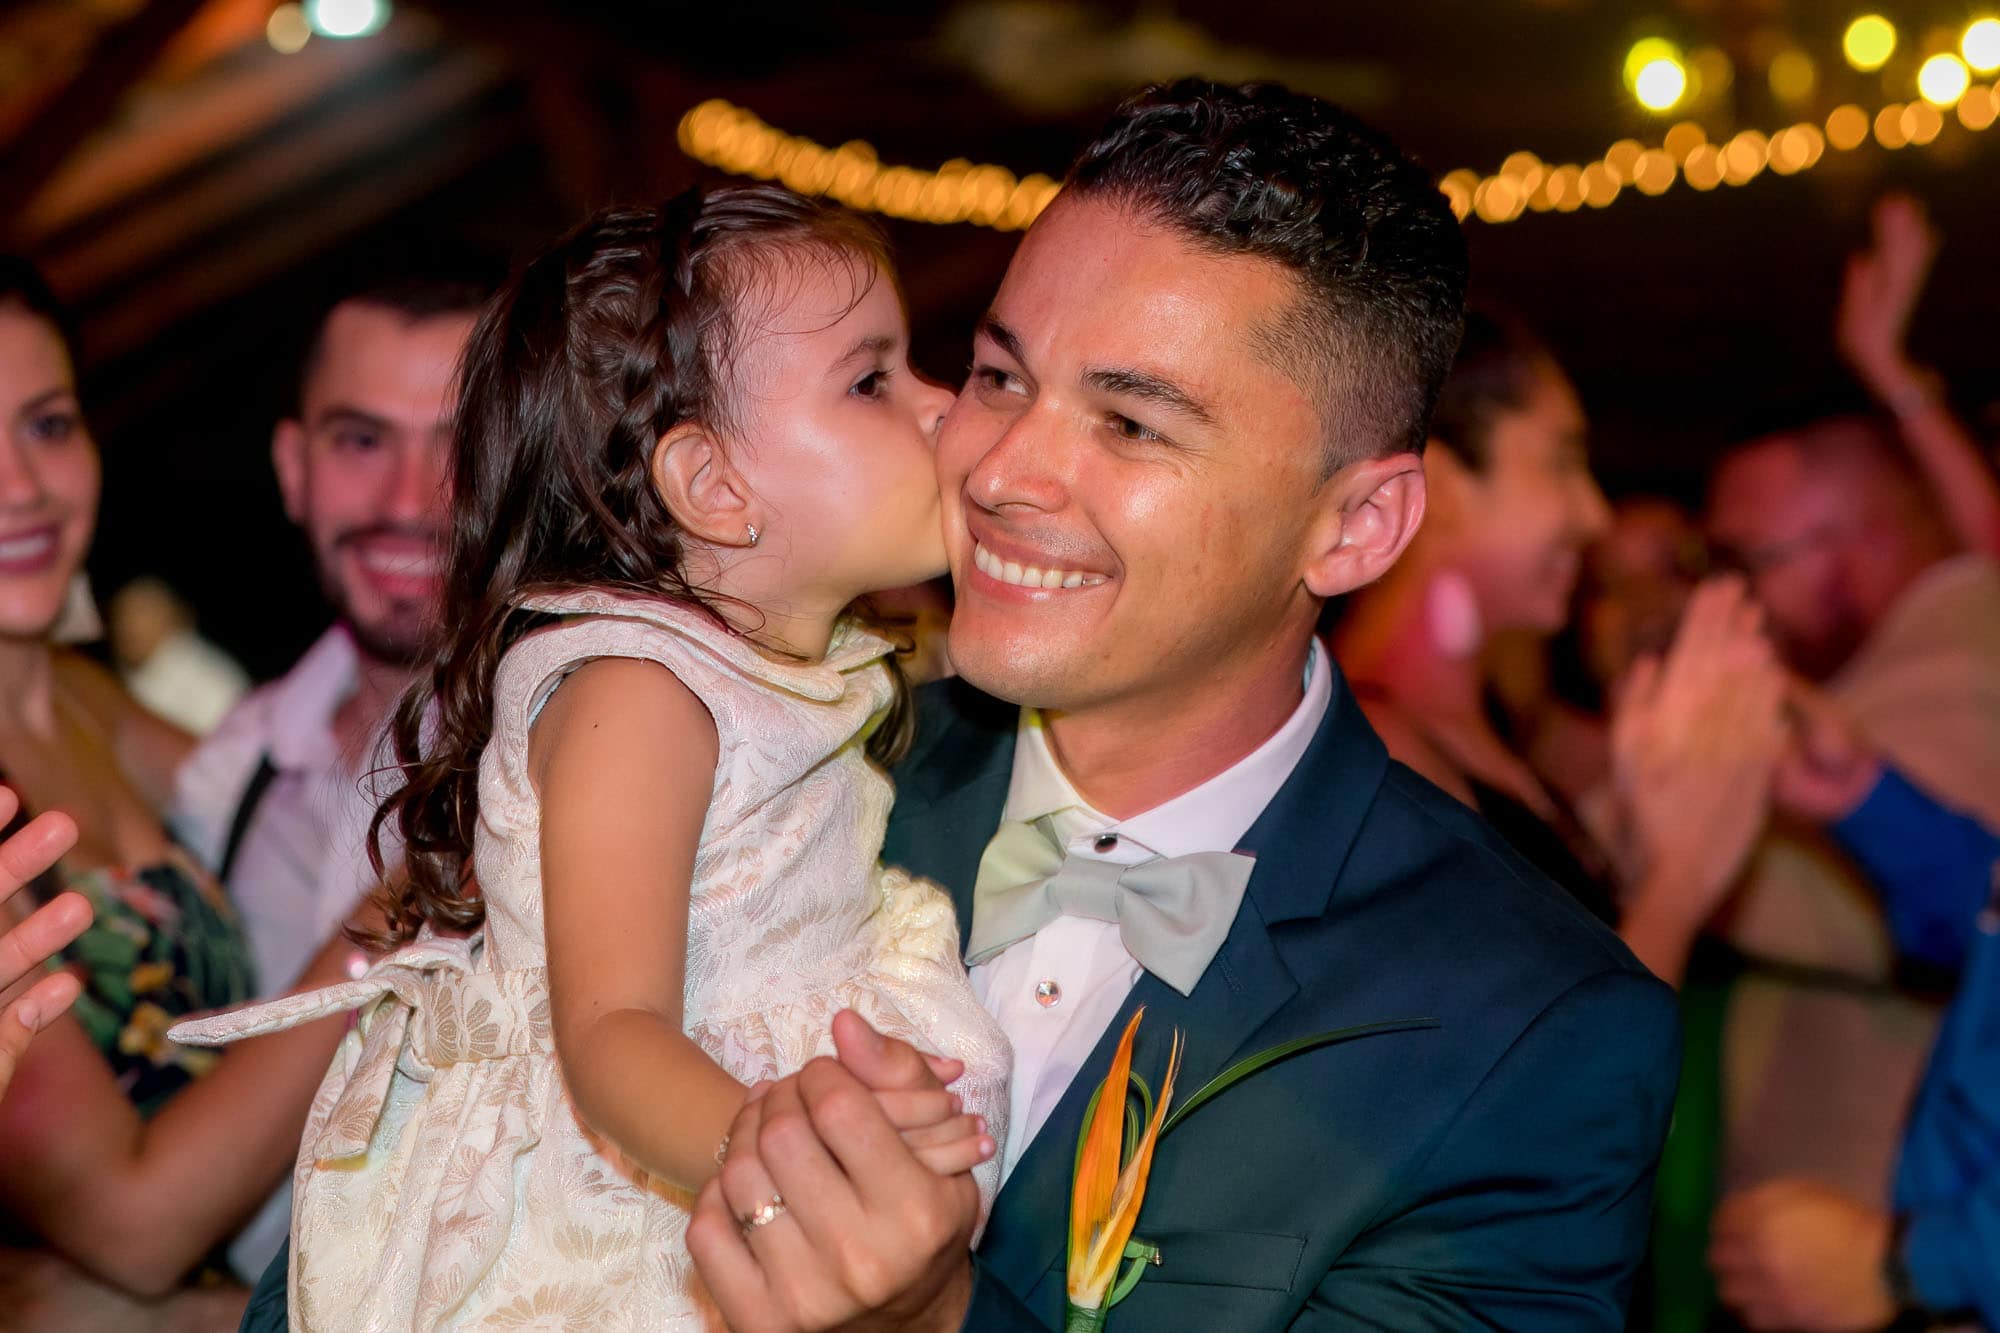 The groom gets a kiss from a little admirer!